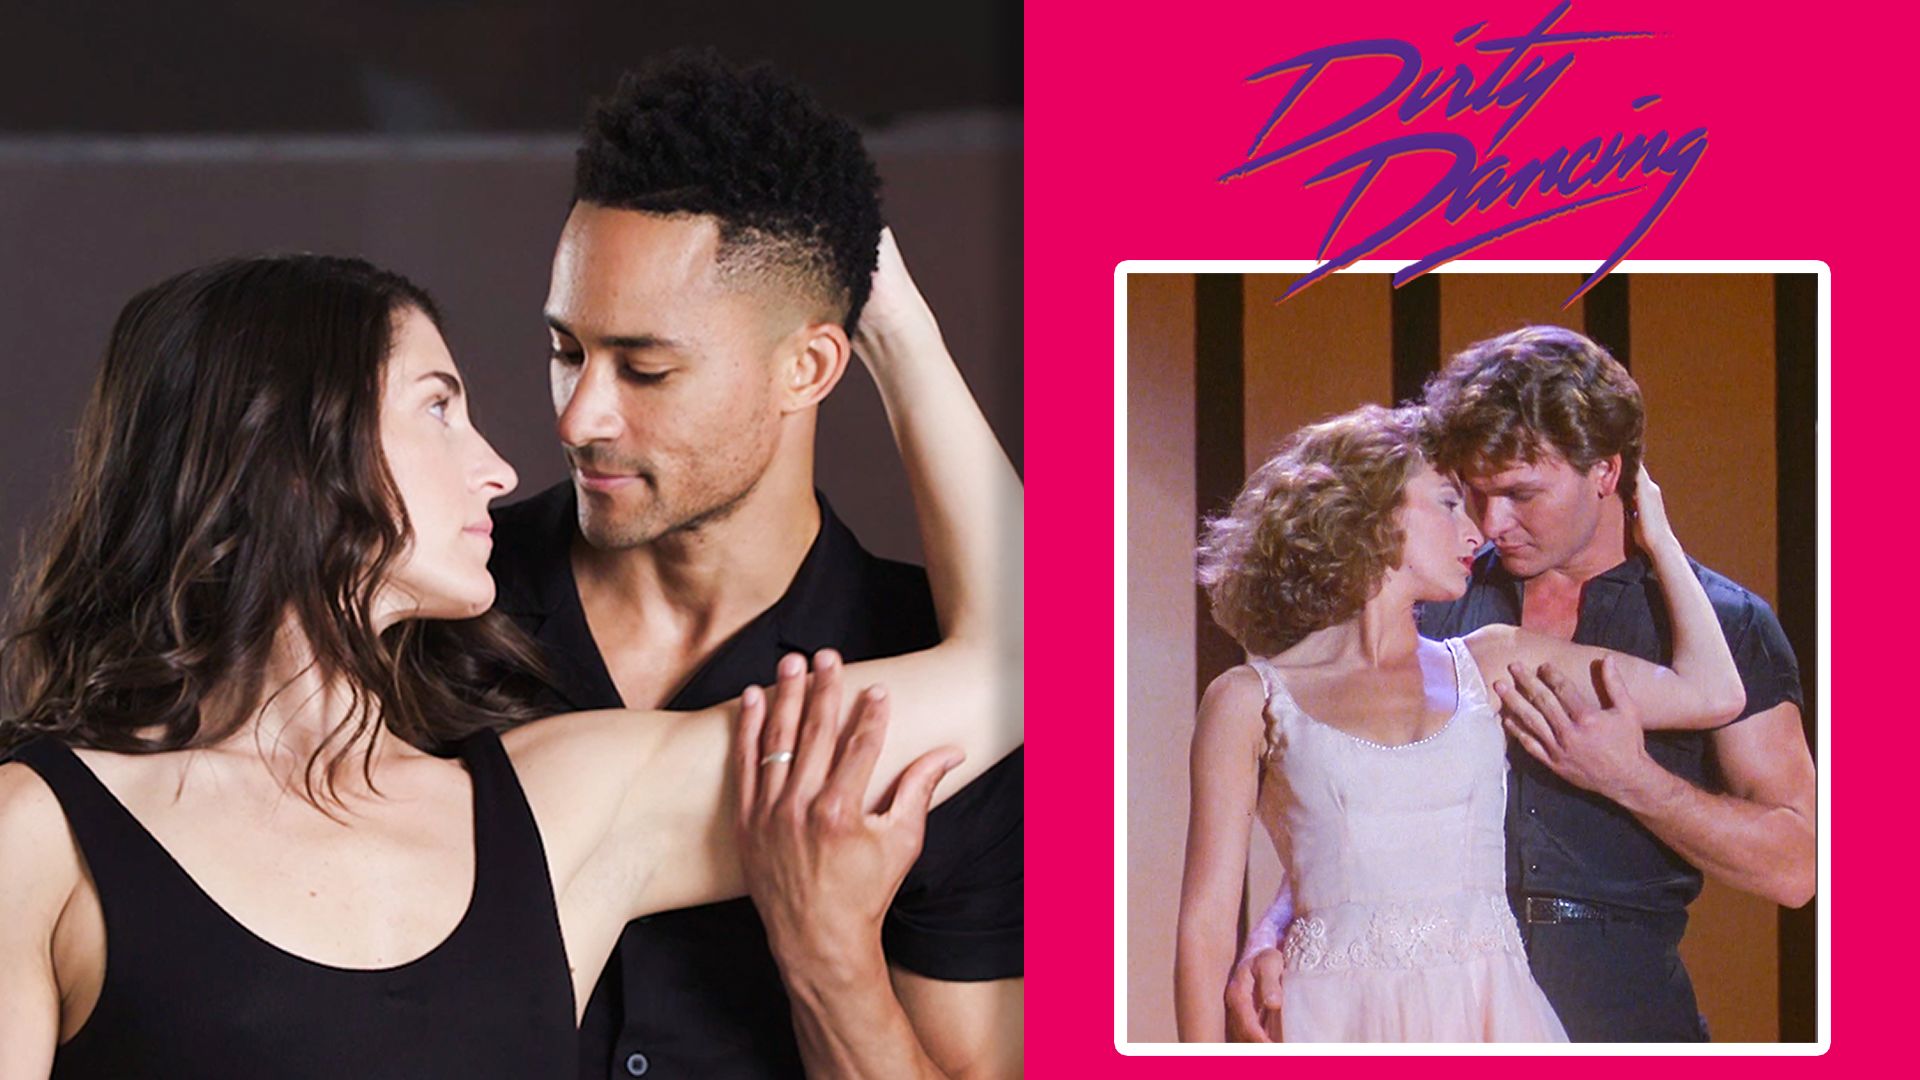 Watch Choreographers Break Down the Final Dance Scene from Dirty Dancing Movies in Motion Vanity Fair image